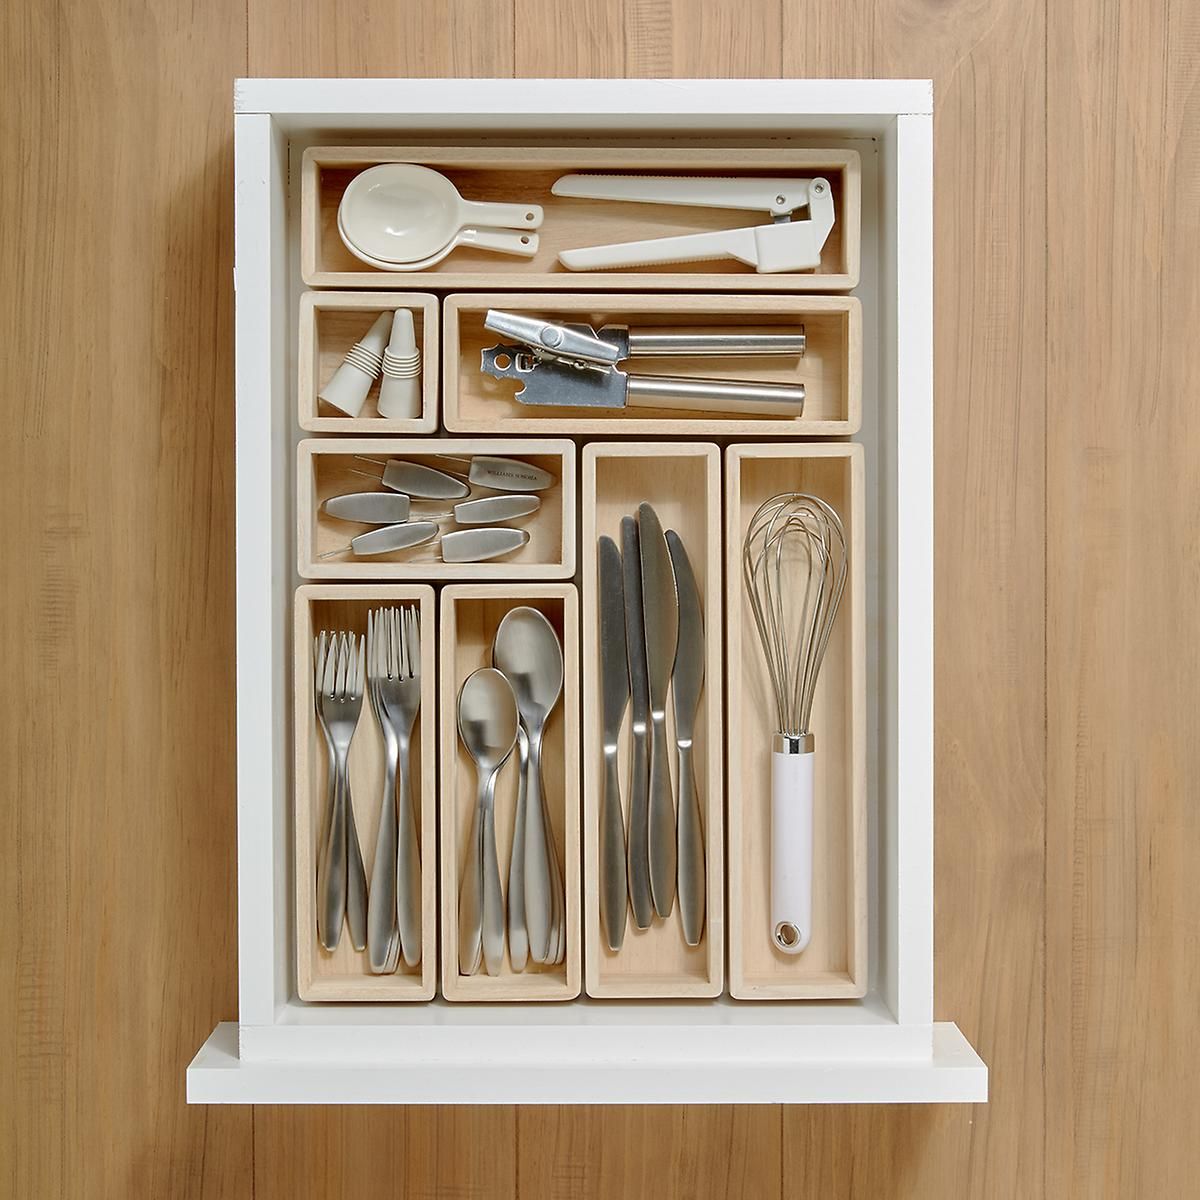 The Home Edit by iDesign Drawer Organizers